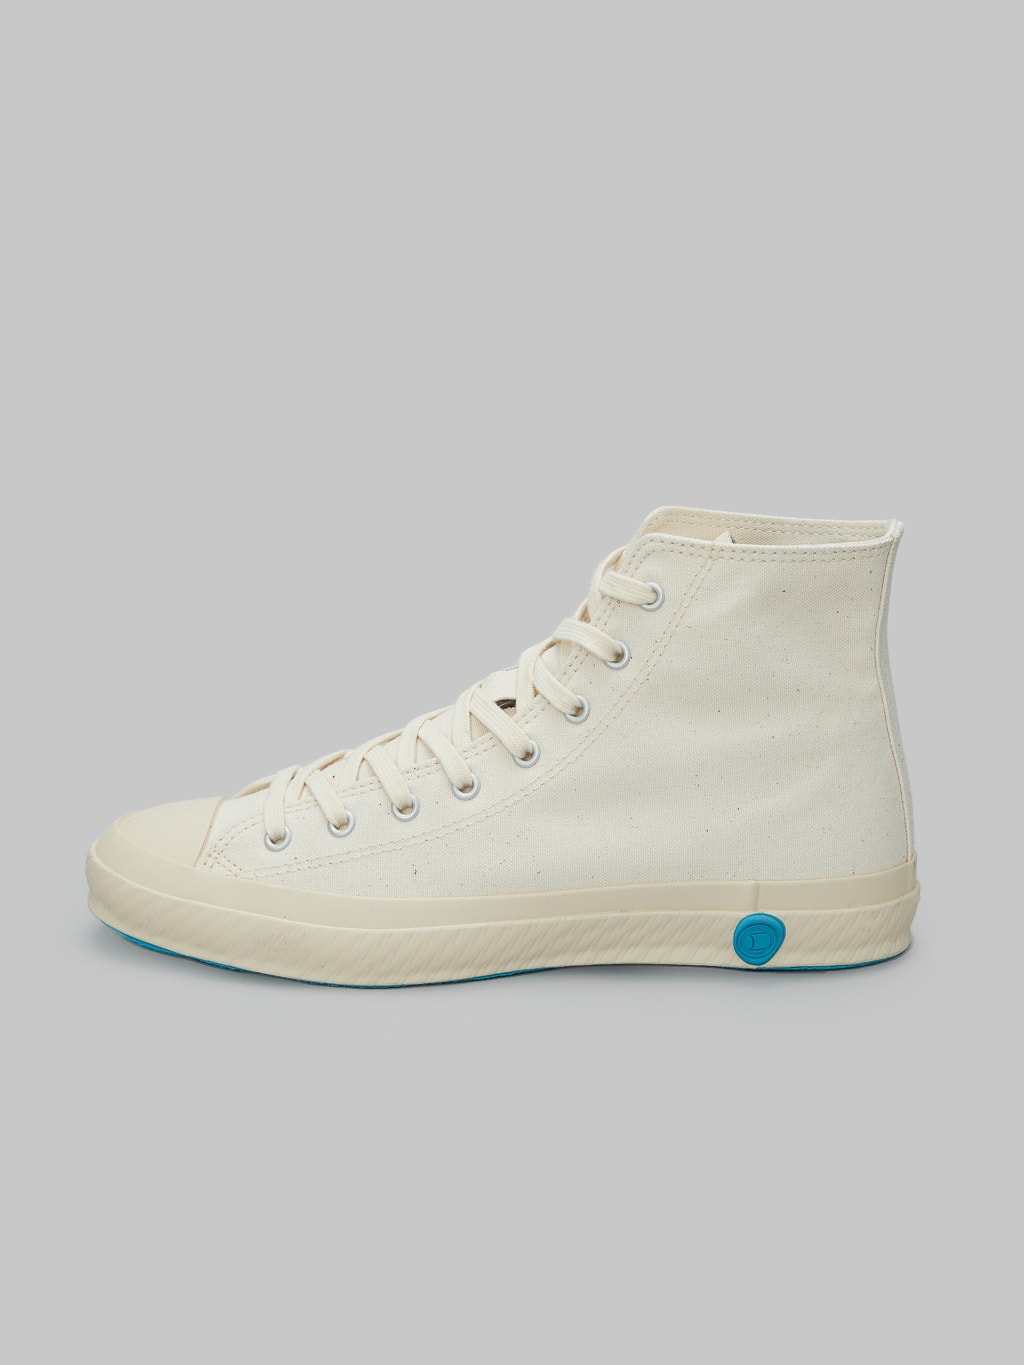 Shoes like pottery high sneaker white craftsmanship